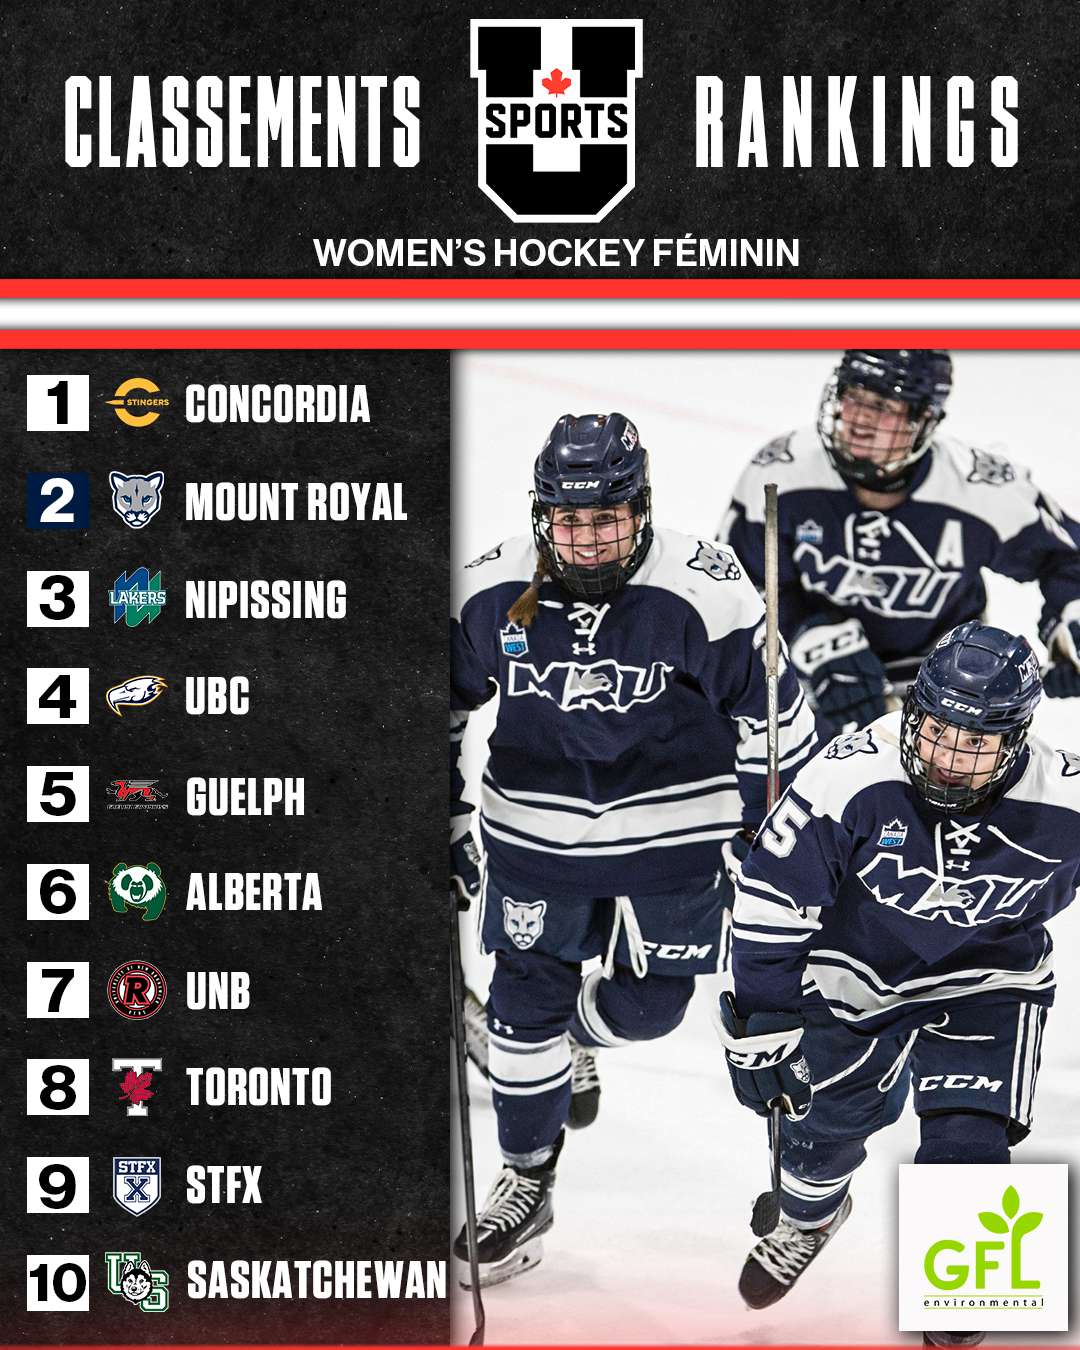 Top_10_WHKY.png (1.86 MB)